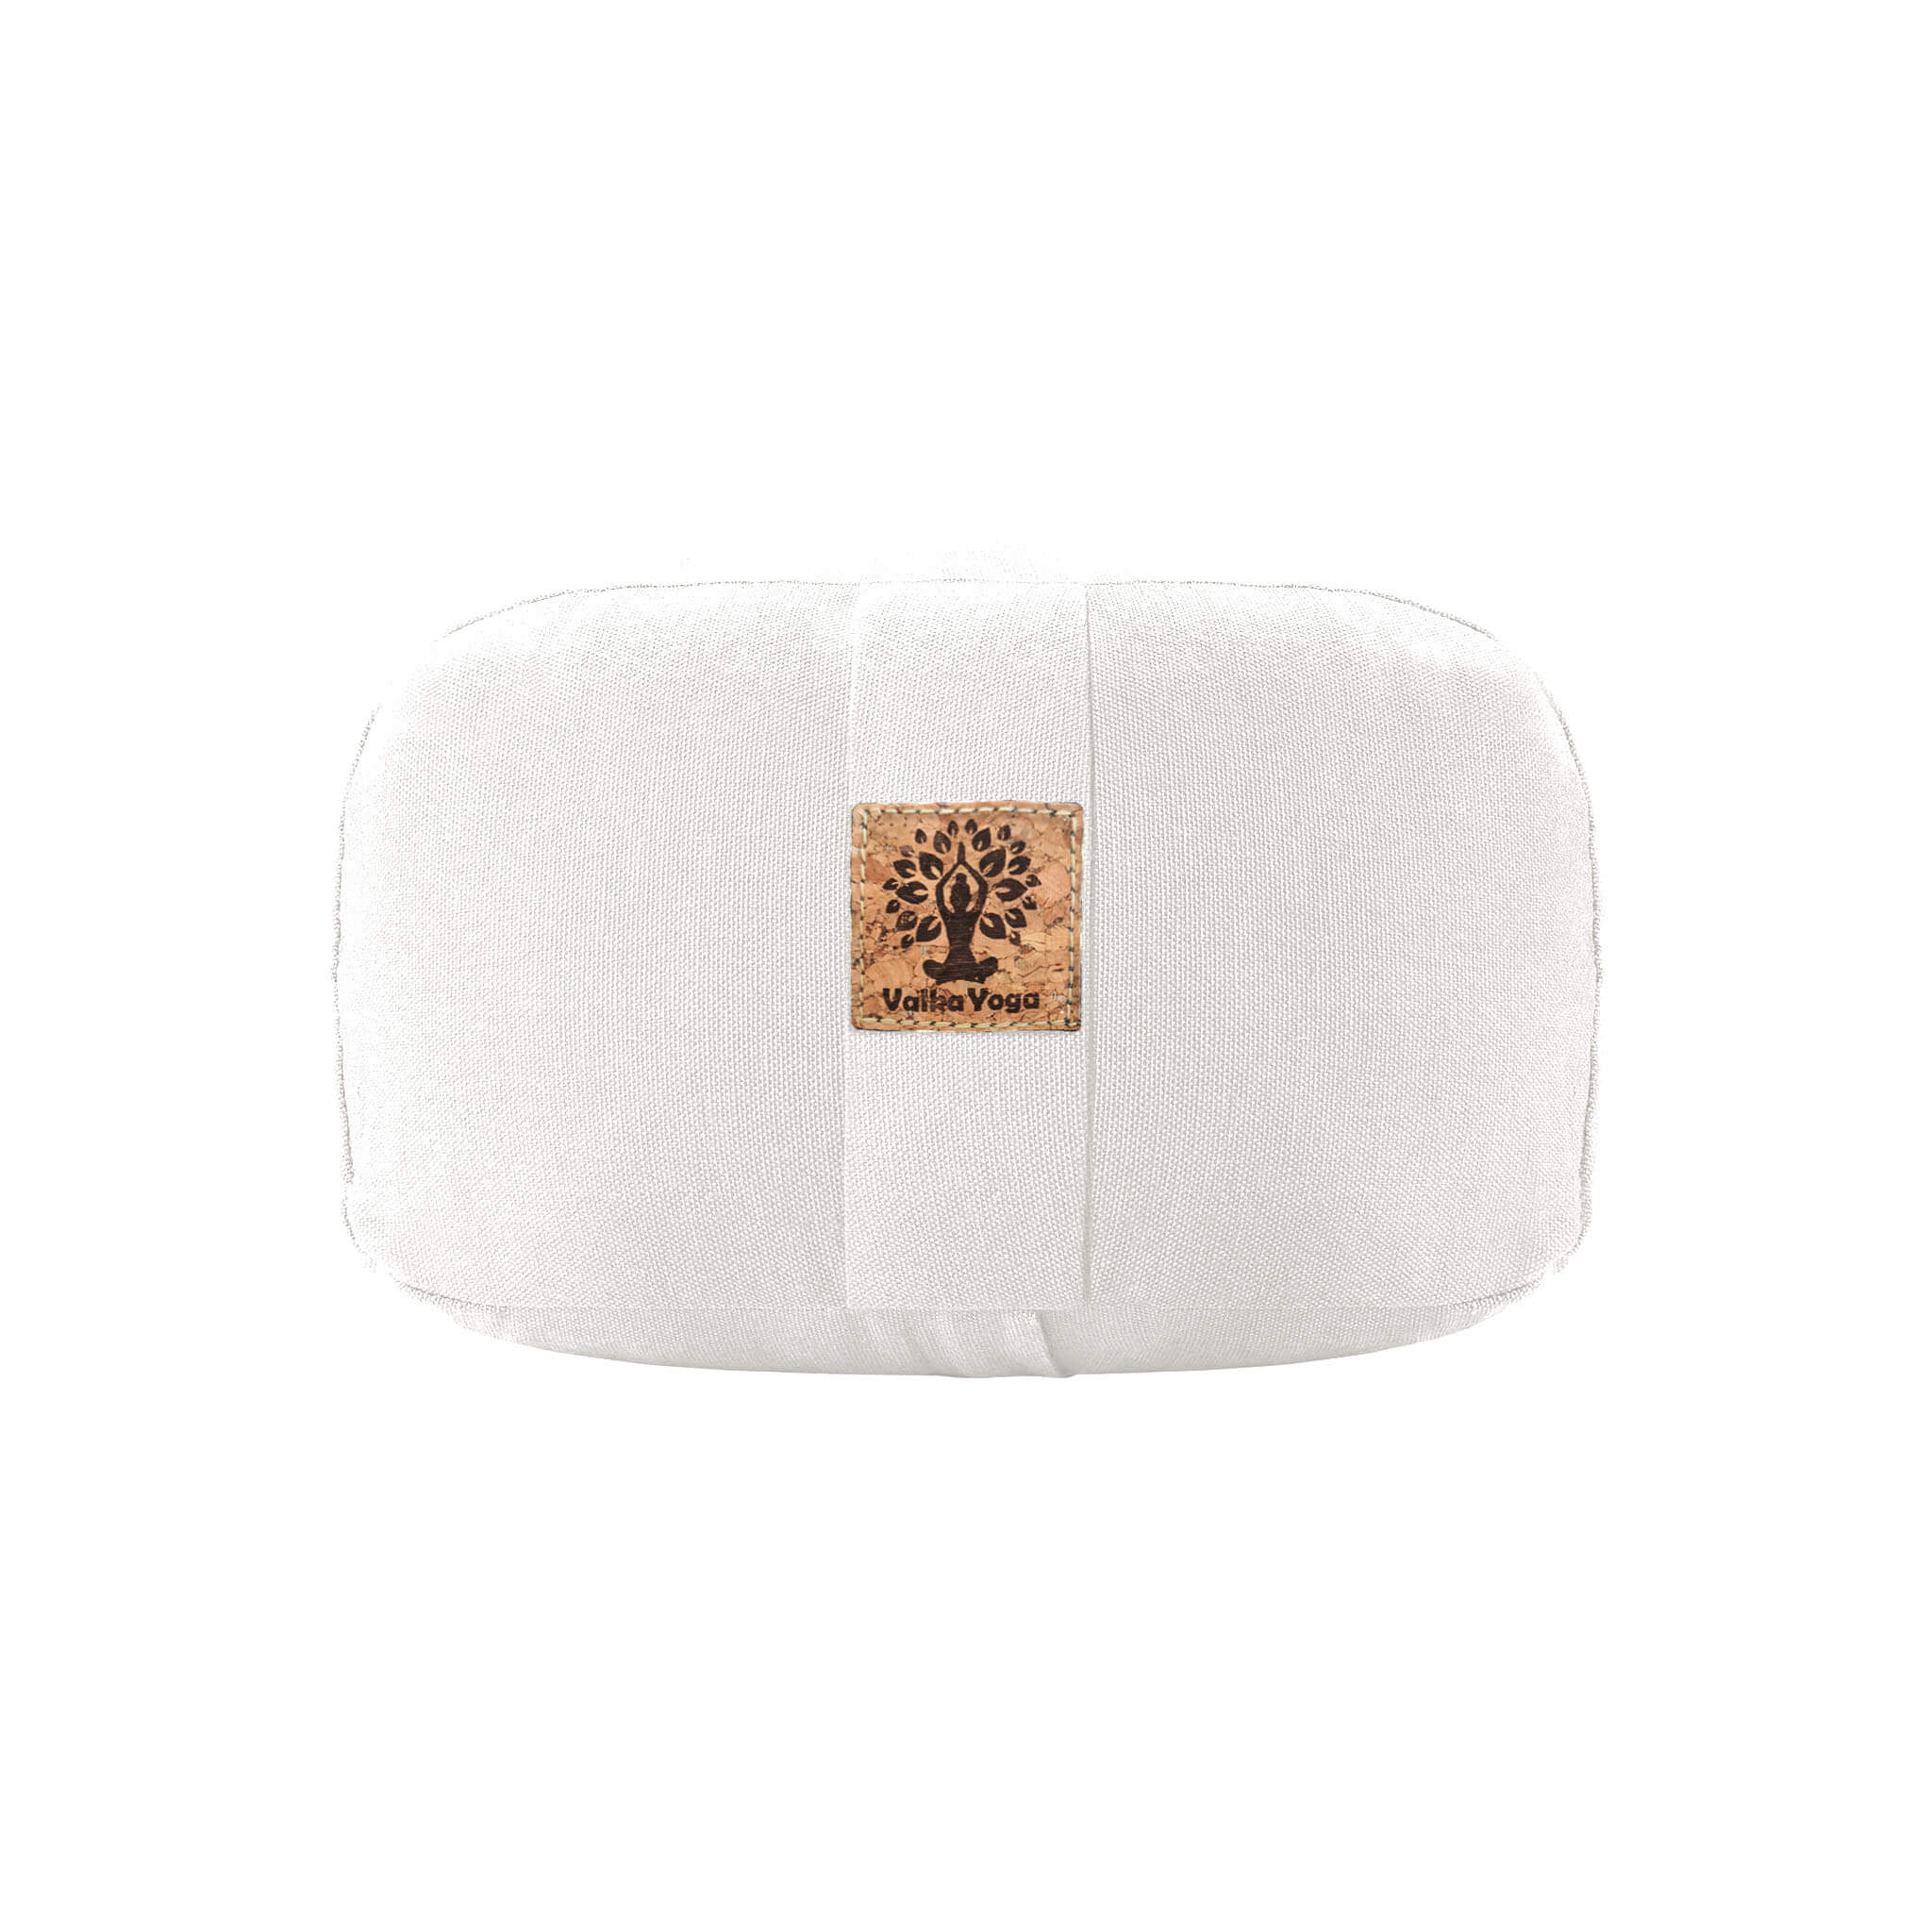 White yoga bolster with cork label